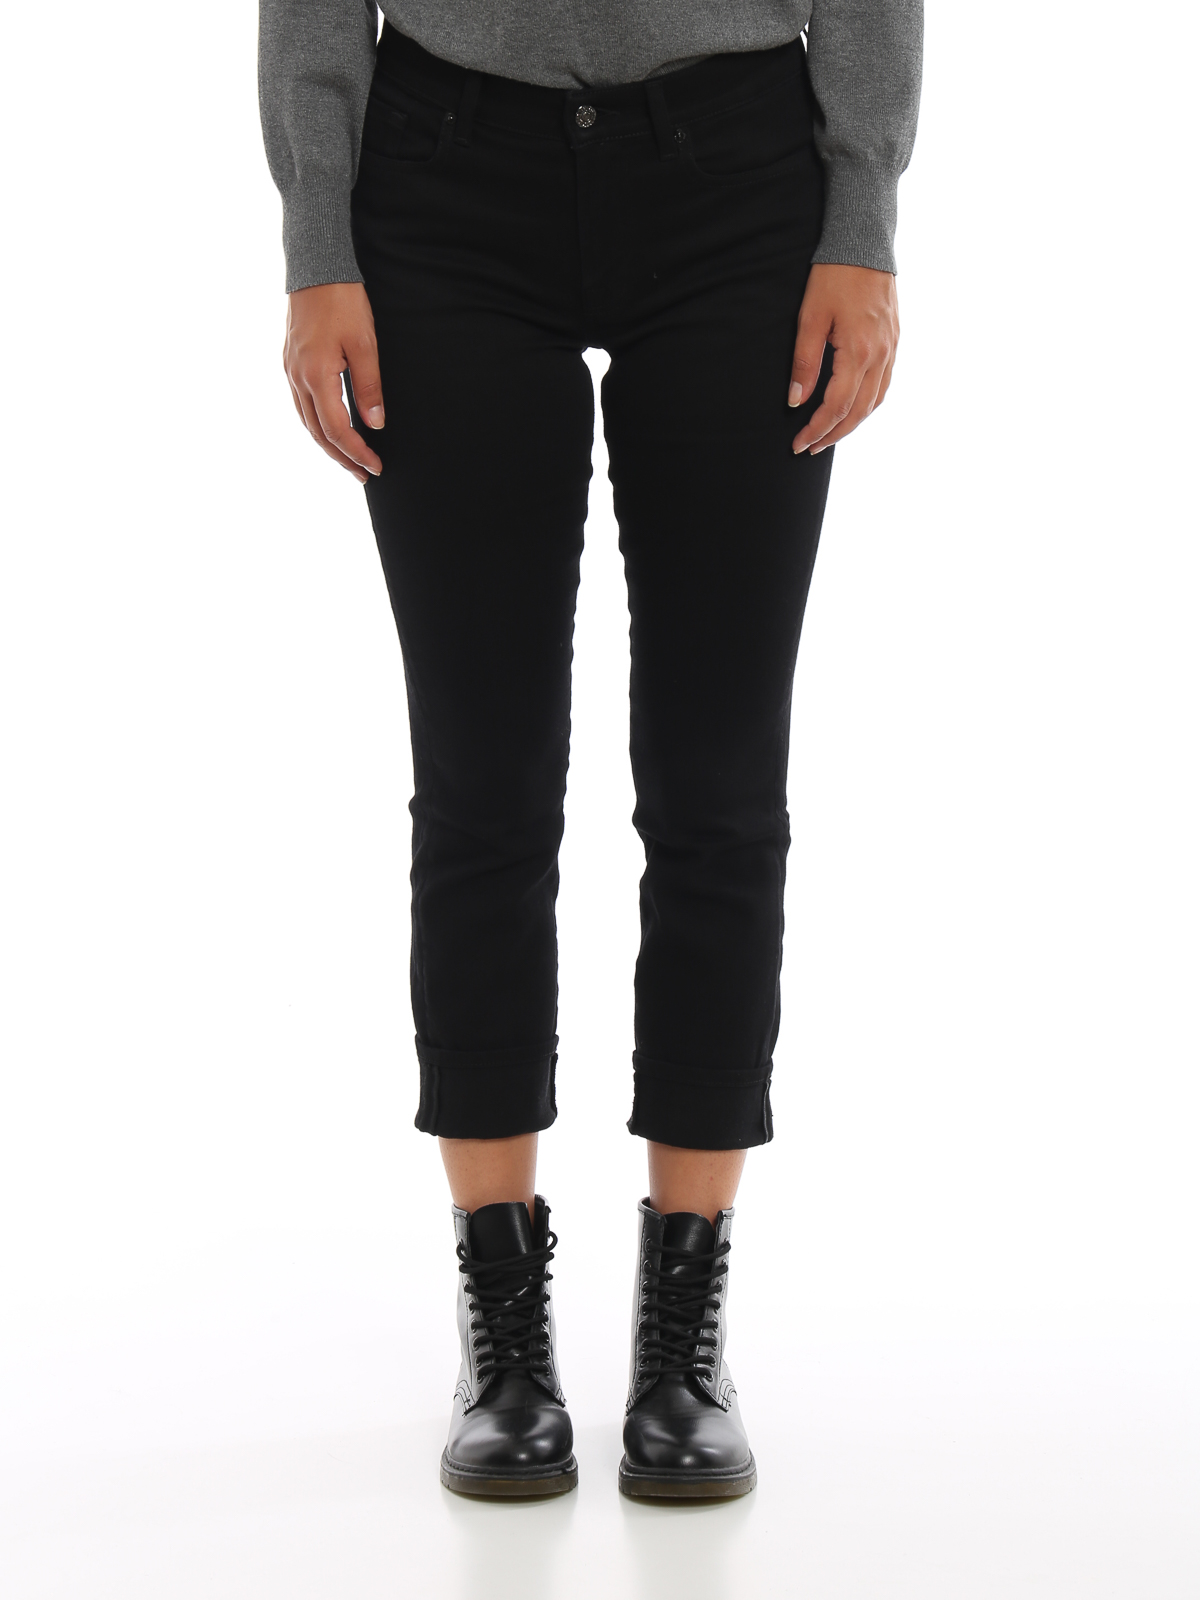 relaxed skinny black jeans